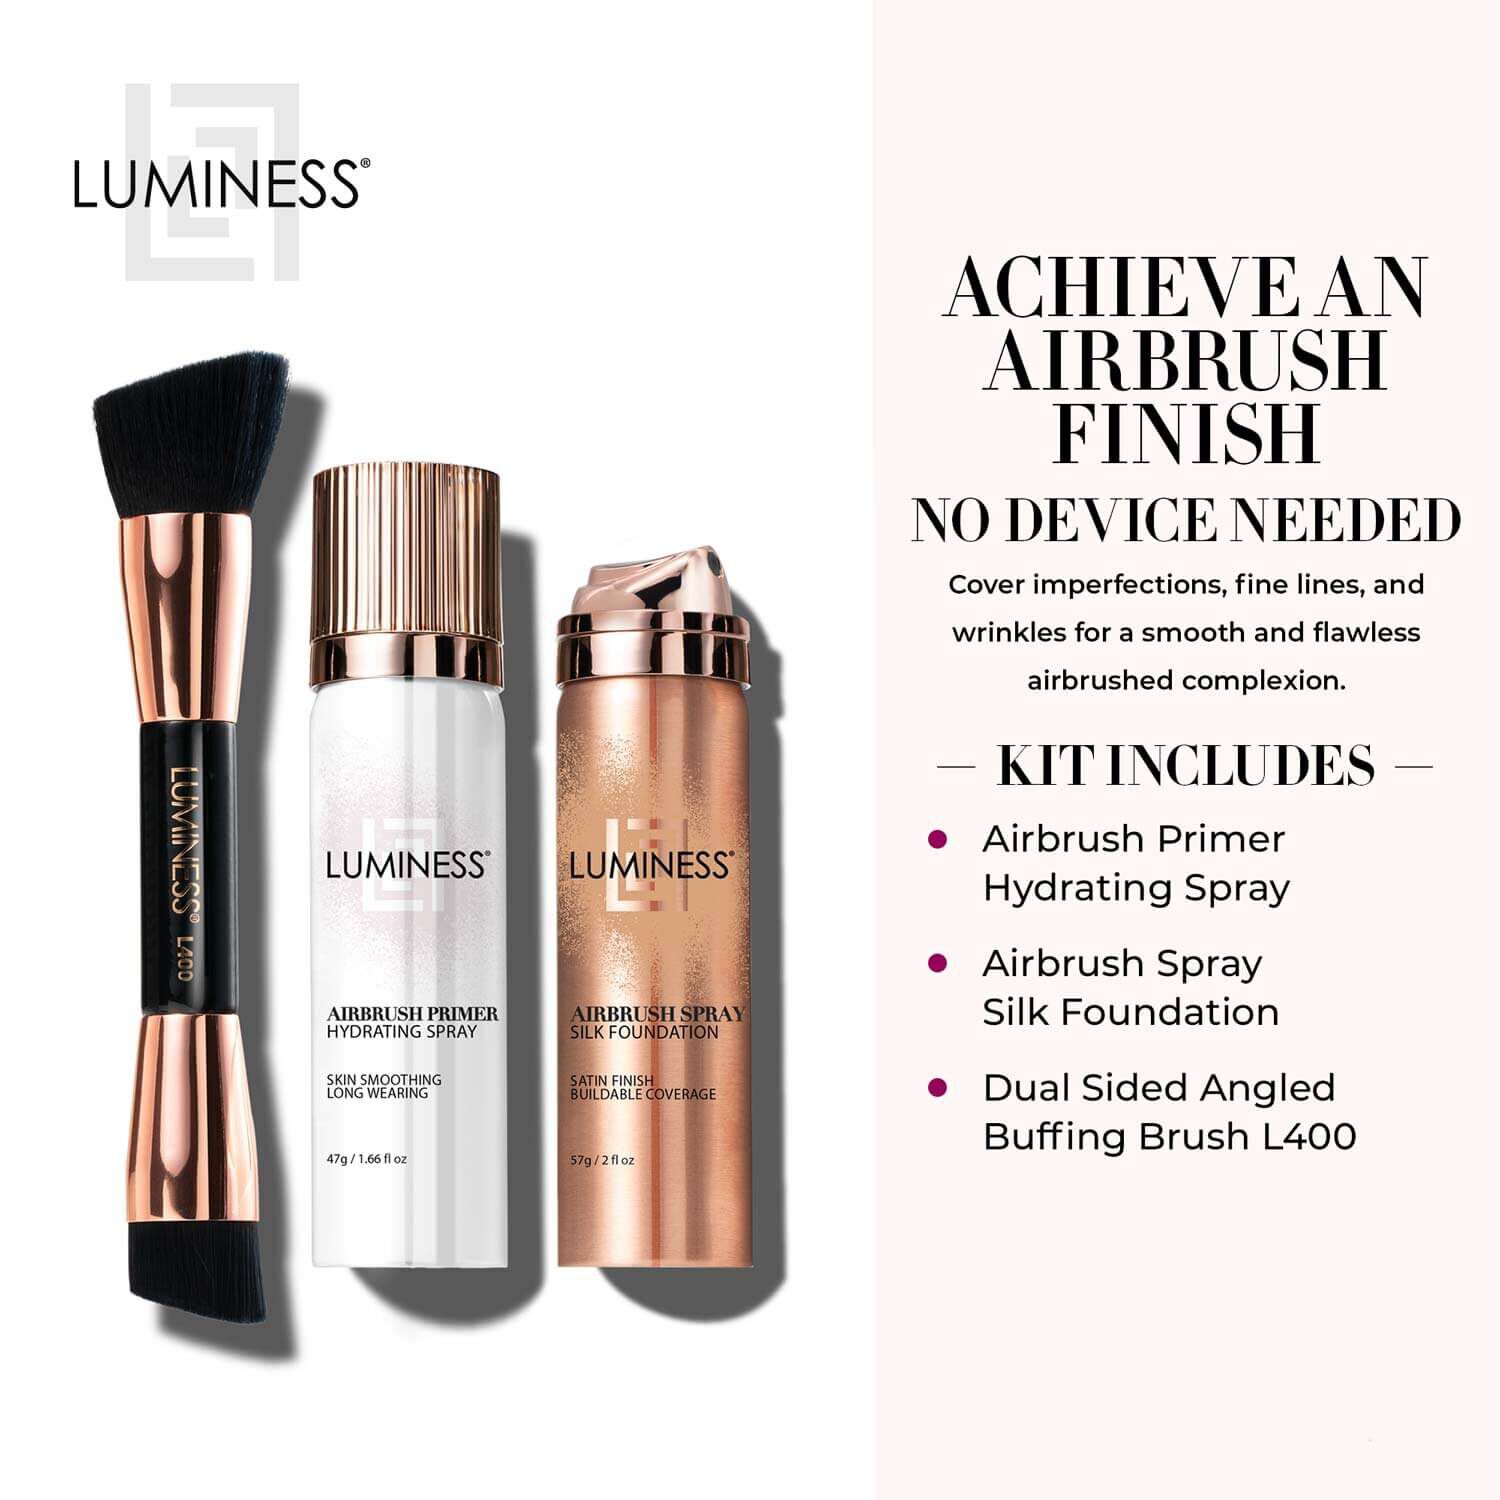 Luminess airbrush makeup kit dupe, Gallery posted by Amber